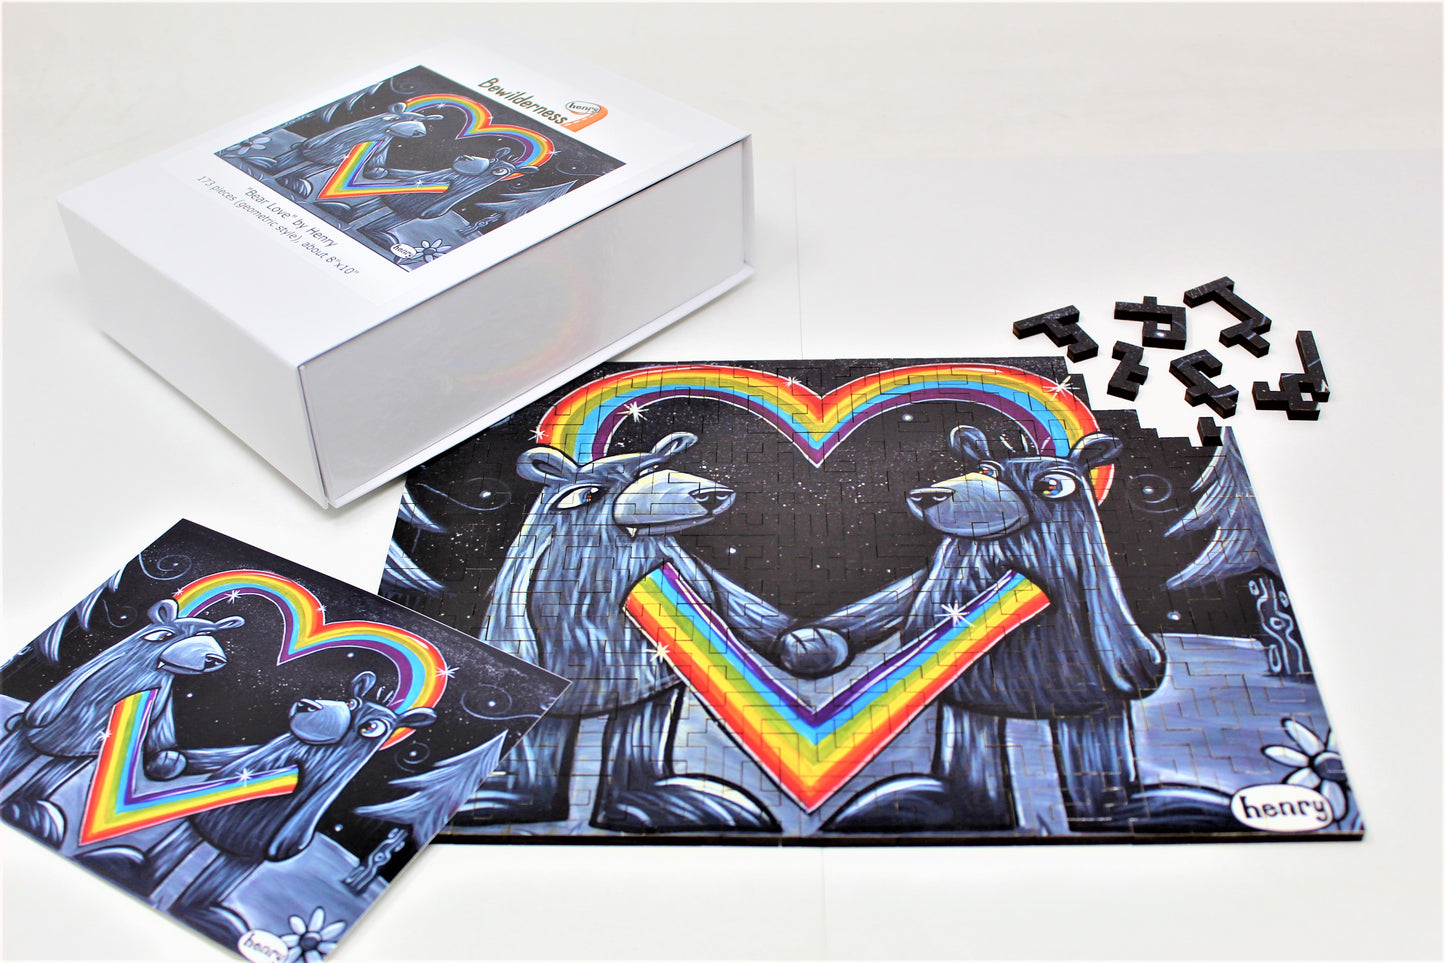 Bear Love 173 Piece Geometric Puzzle Featuring the Art of Henry